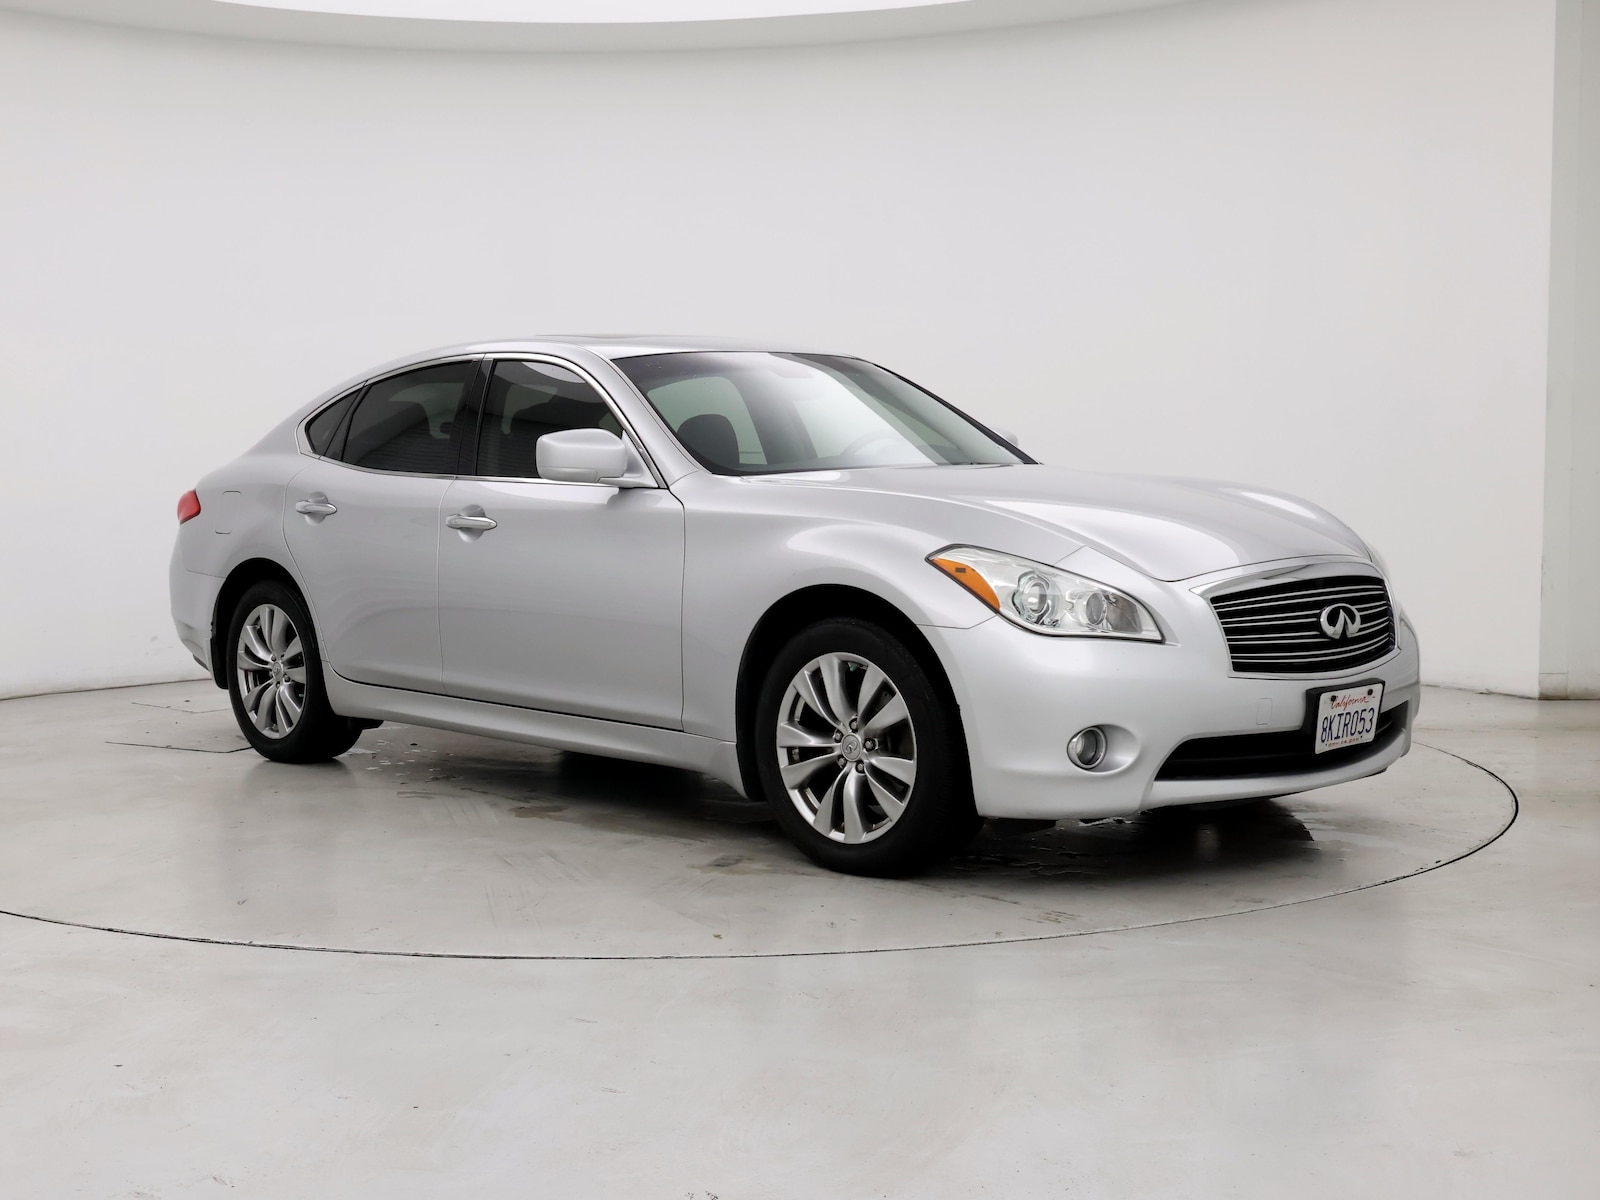 Used 2013 INFINITI M 37 with VIN JN1BY1ARXDM603639 for sale in Spokane Valley, WA